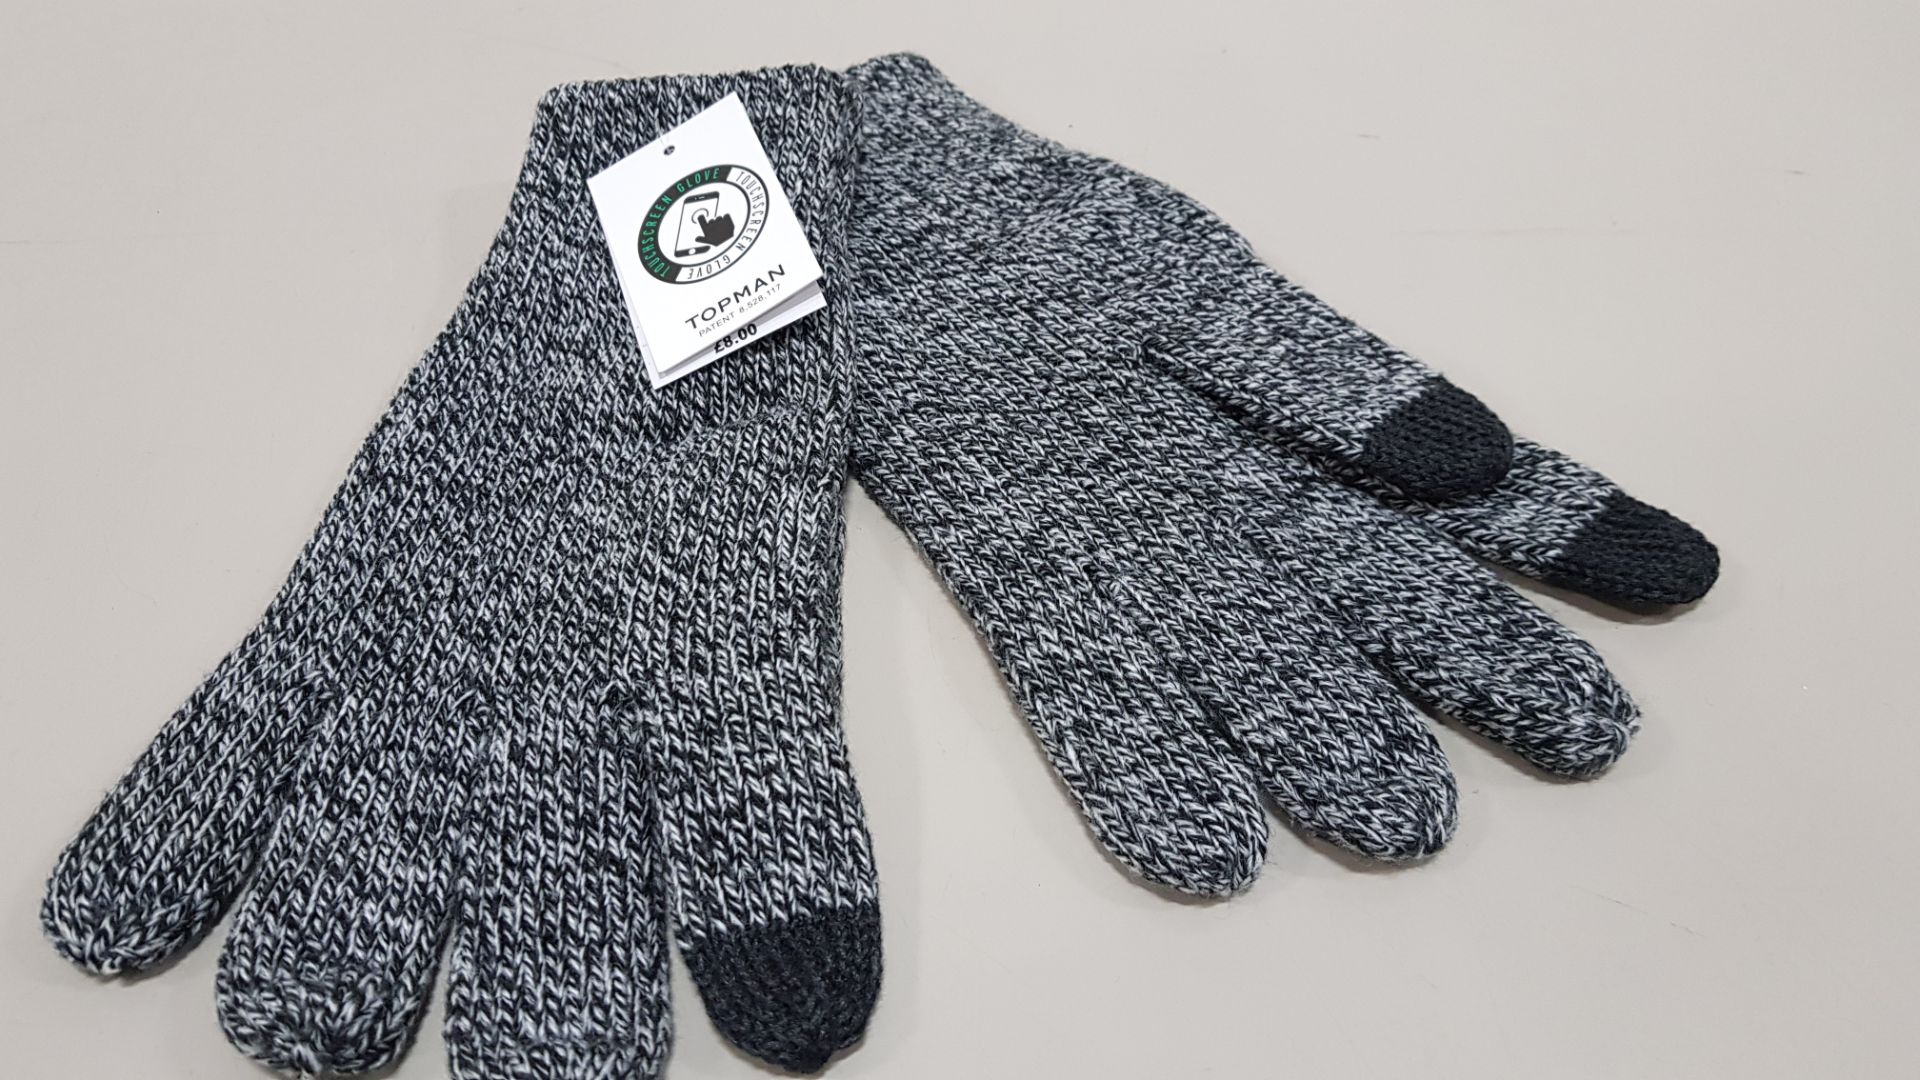 51 X BRAND NEW TOPMAN GREY WINTER GLOVES SIZE M/L TOTAL RRP £408.00 (PICK LOOSE - DOUBLE PACKS)